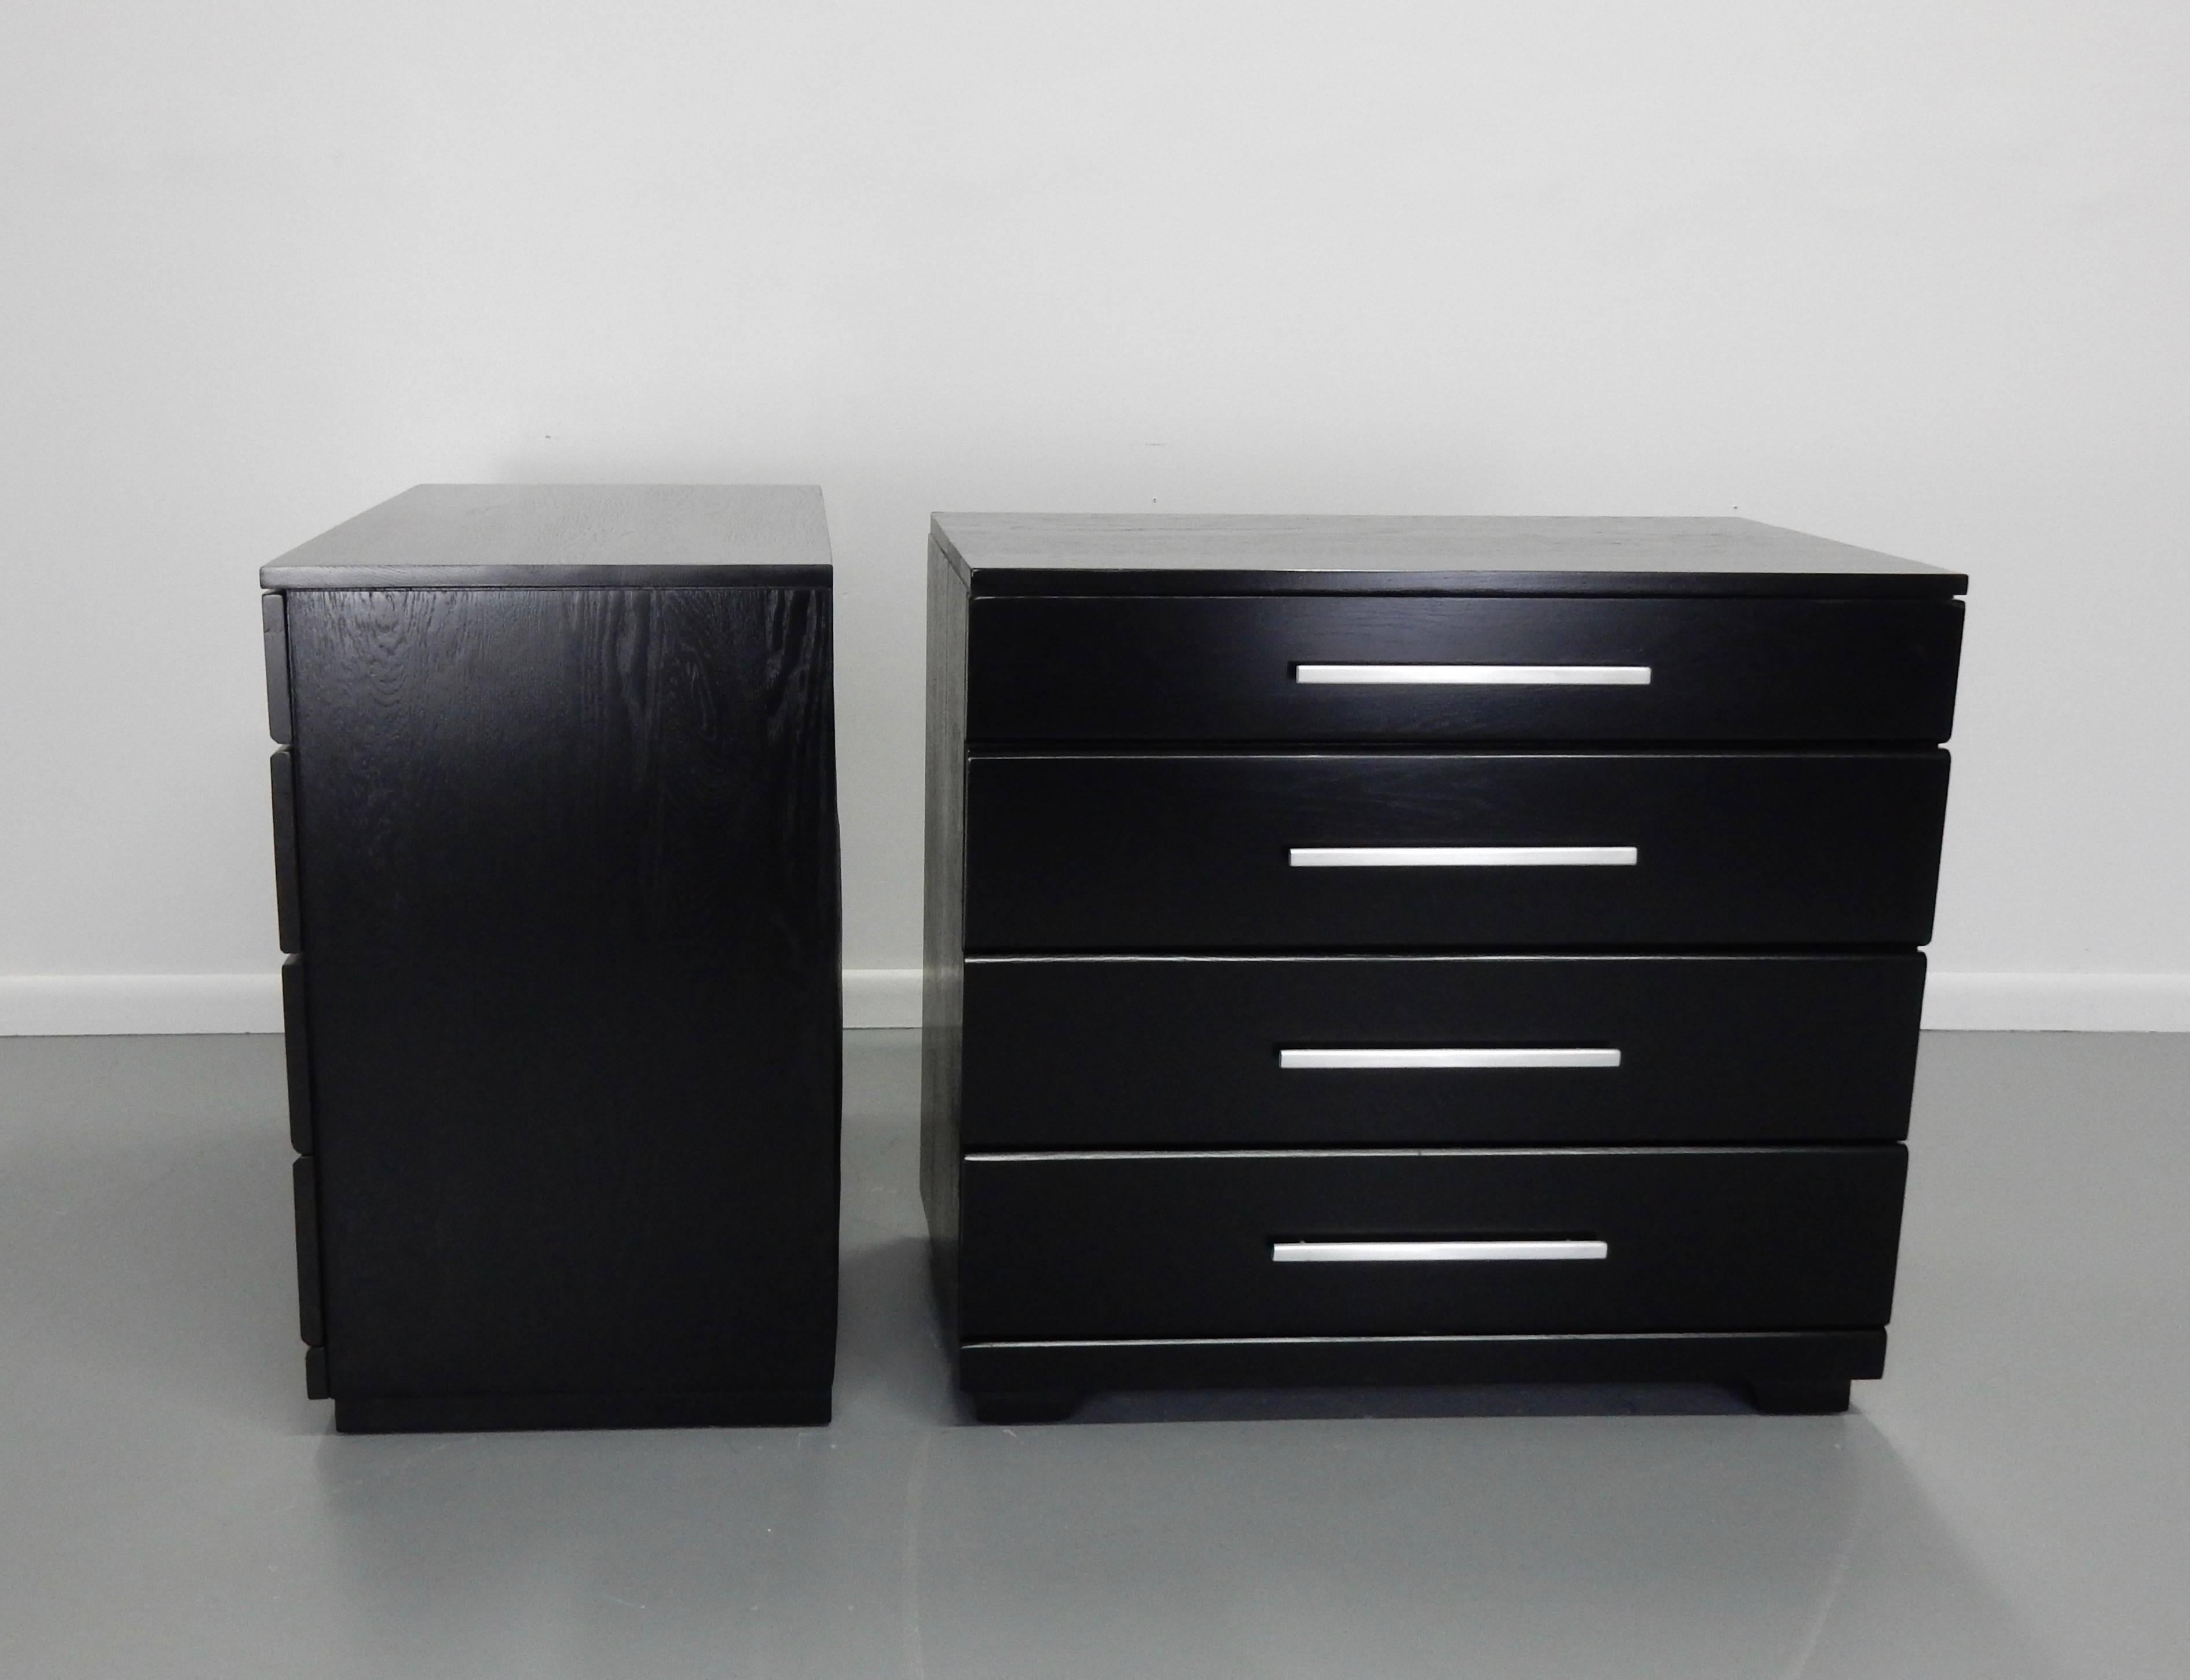 Beautifully crafted pair of bedside chests by Raymond Loewy for Mengel with brushed aluminum bar pulls. These chests have been meticulously refinished in black lacquer.


Ray Loewy worked in that extraordinary period with Harvey Probber, Vladimir